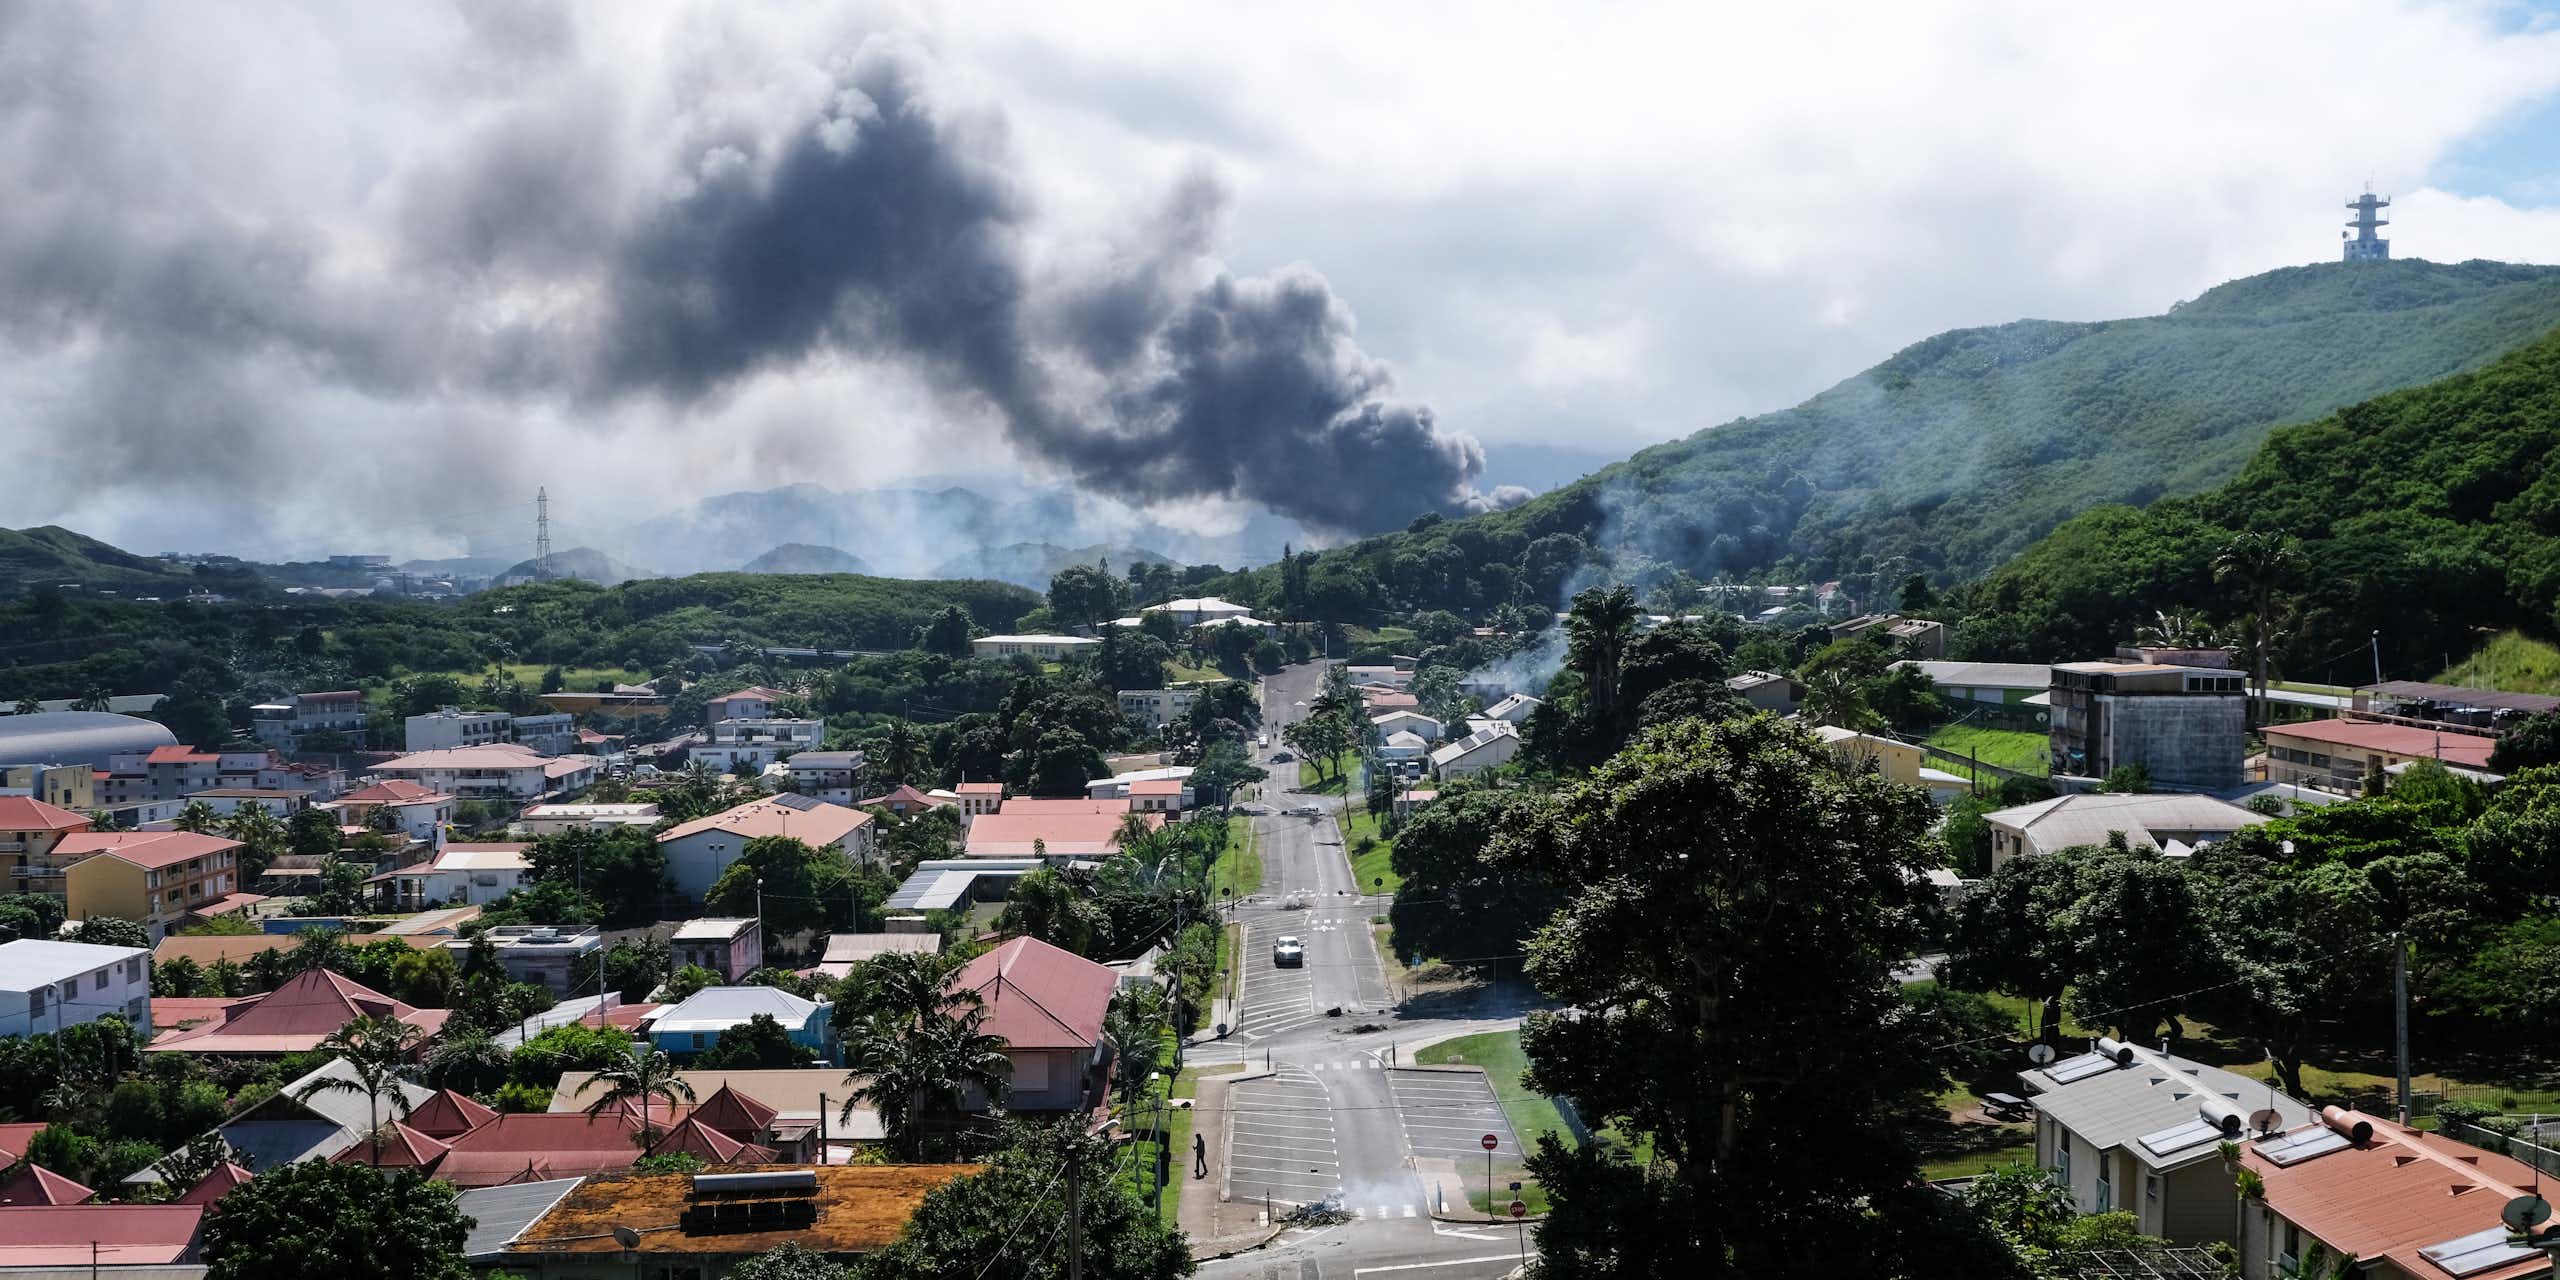 A drone view of a tropical township with plumes of smoke in the distance